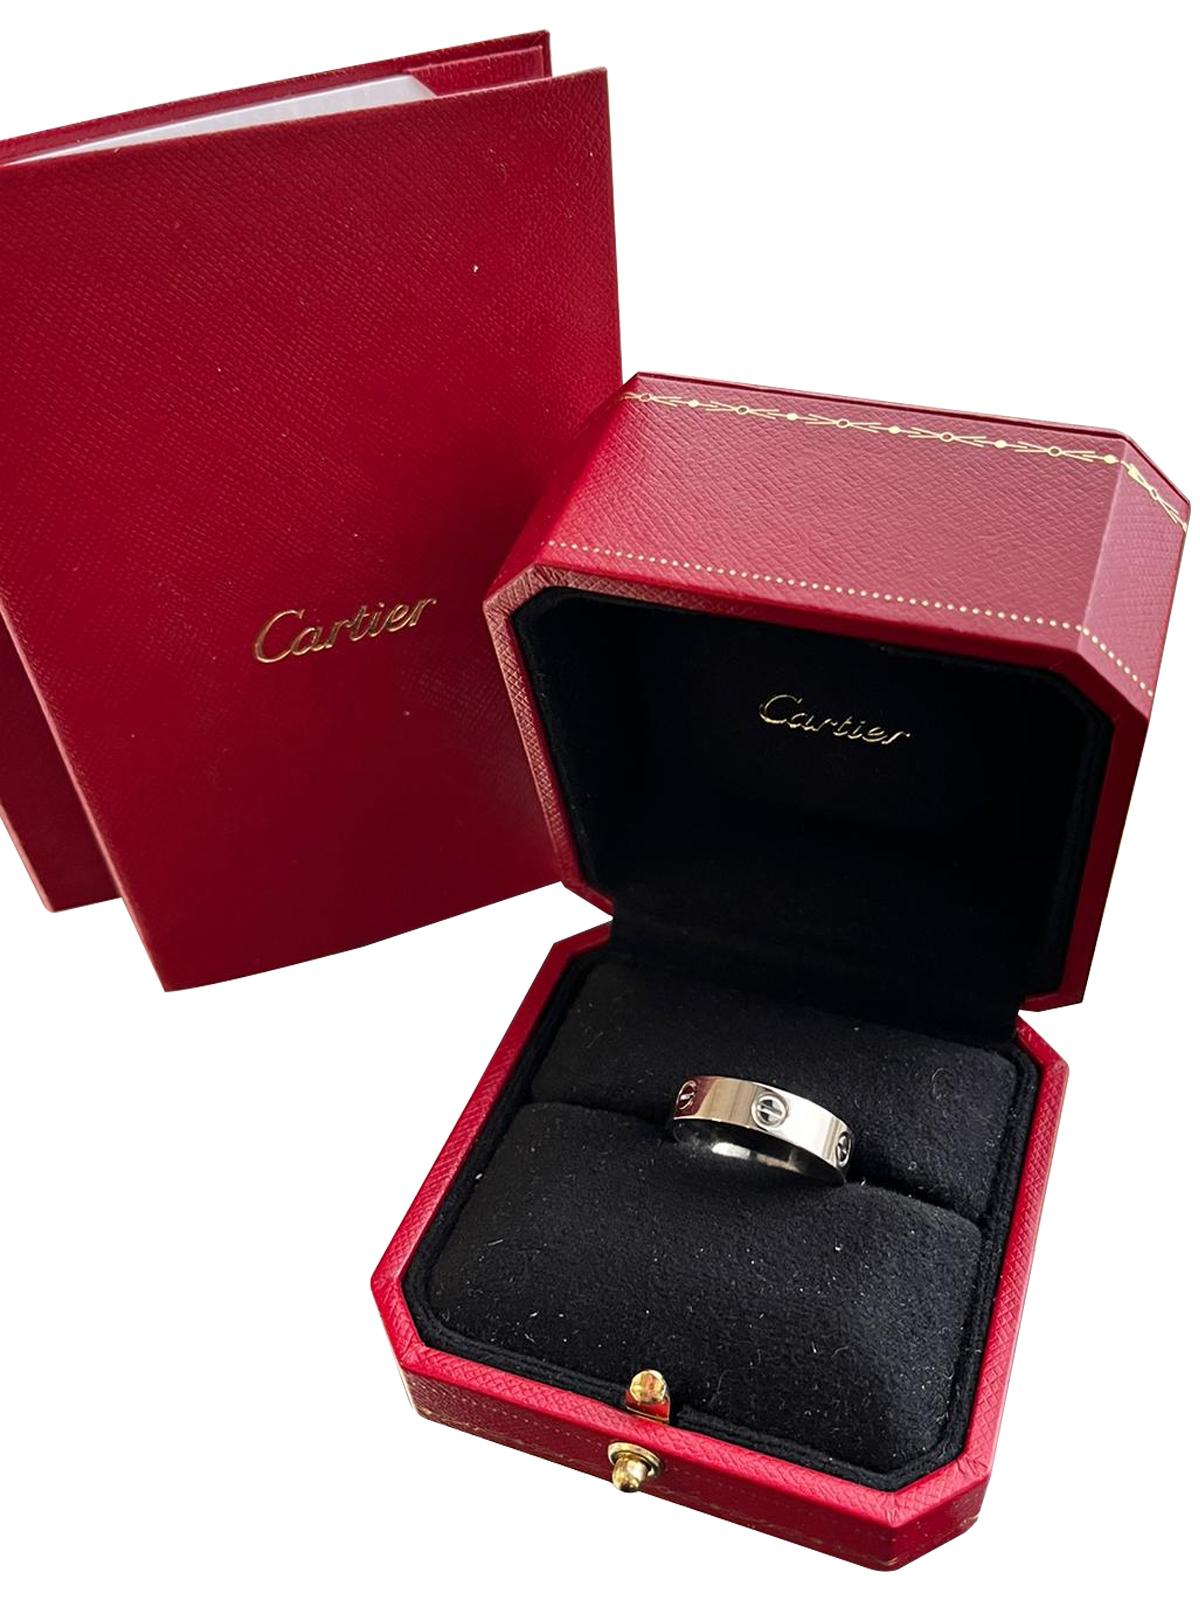 Cartier Love Ring White Gold 63 Size Wedding Band For Sale 2